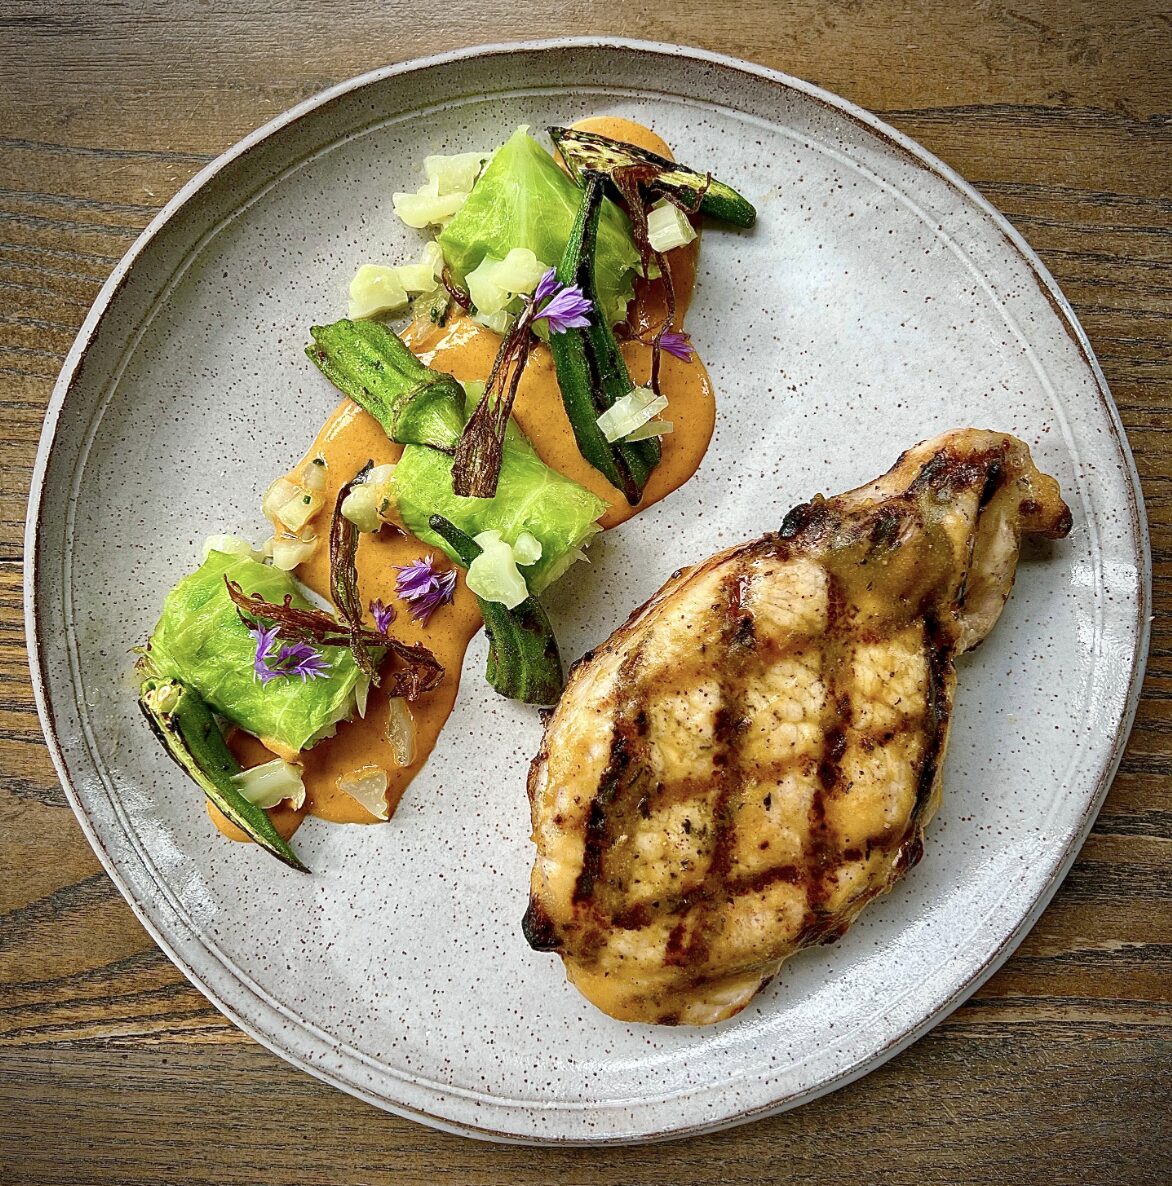 A plated grilled chicken with sautéed vegetables served at J.C. Holdway one of four tried and true Tennessee restaurants